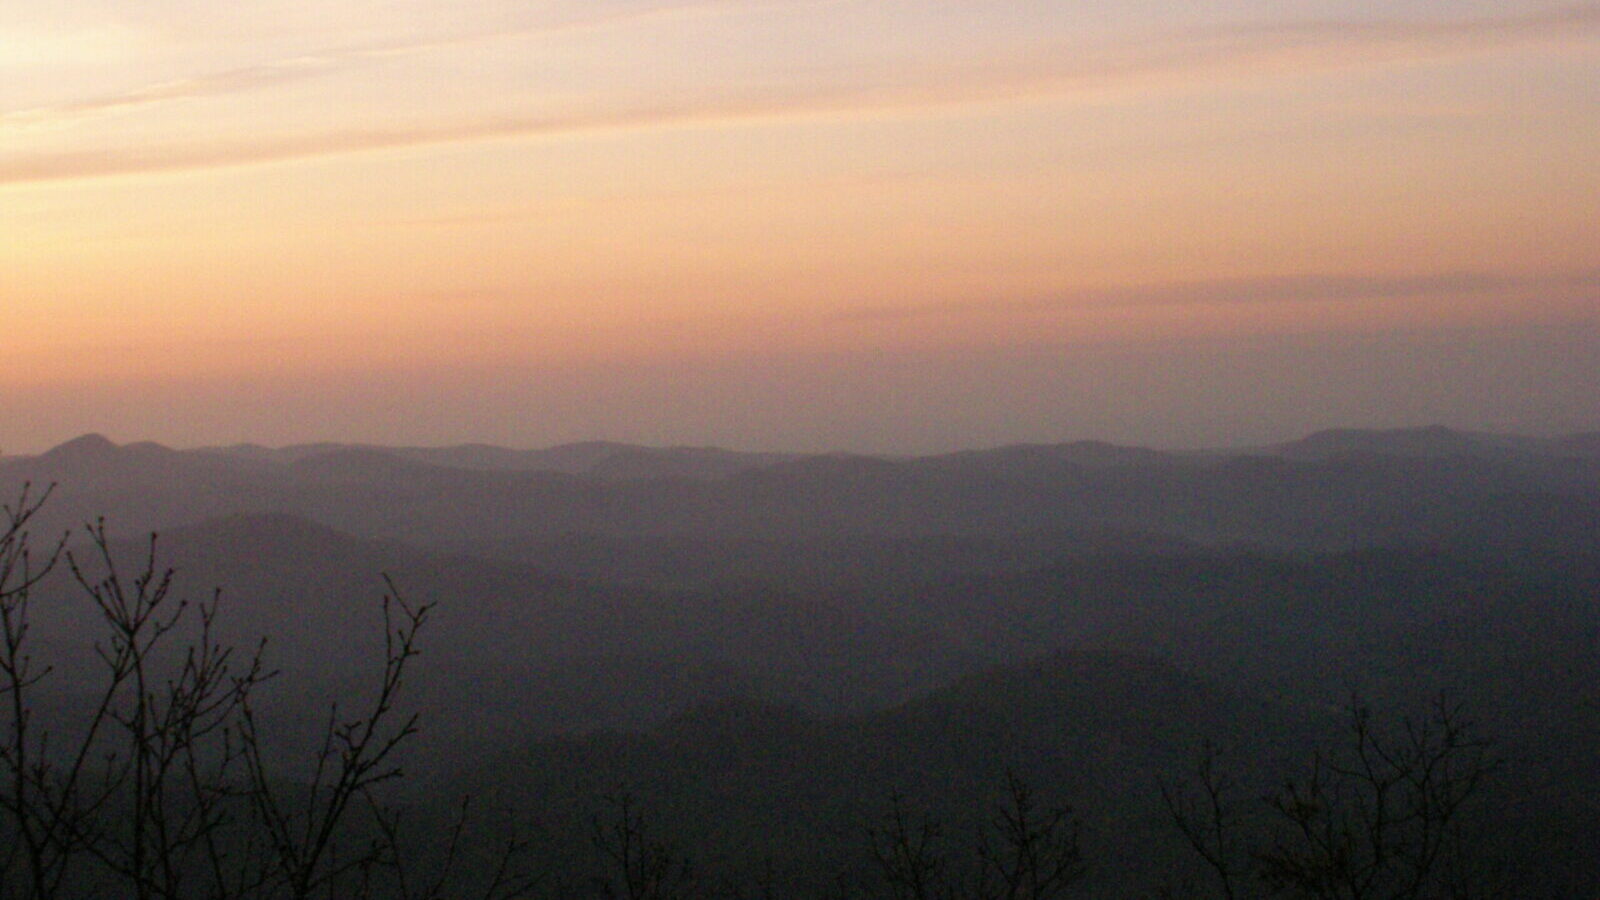 2010 First Annual Mindful Ecotherapy Retreat, Highlands NC